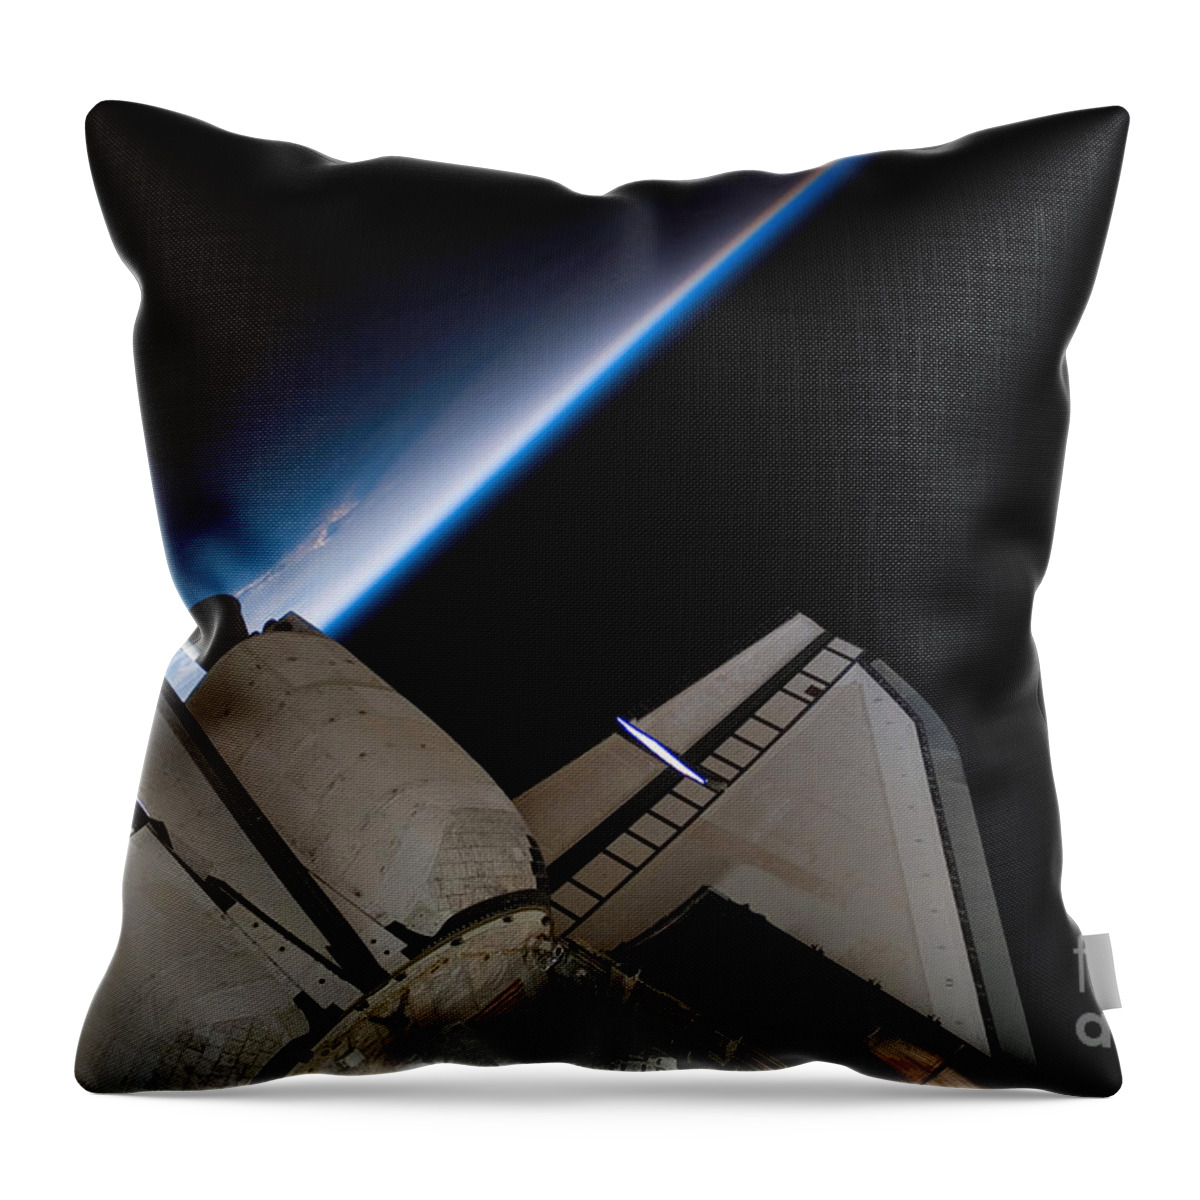 Airglow Throw Pillow featuring the photograph Space Shuttle Endeavour Backdropped by Stocktrek Images